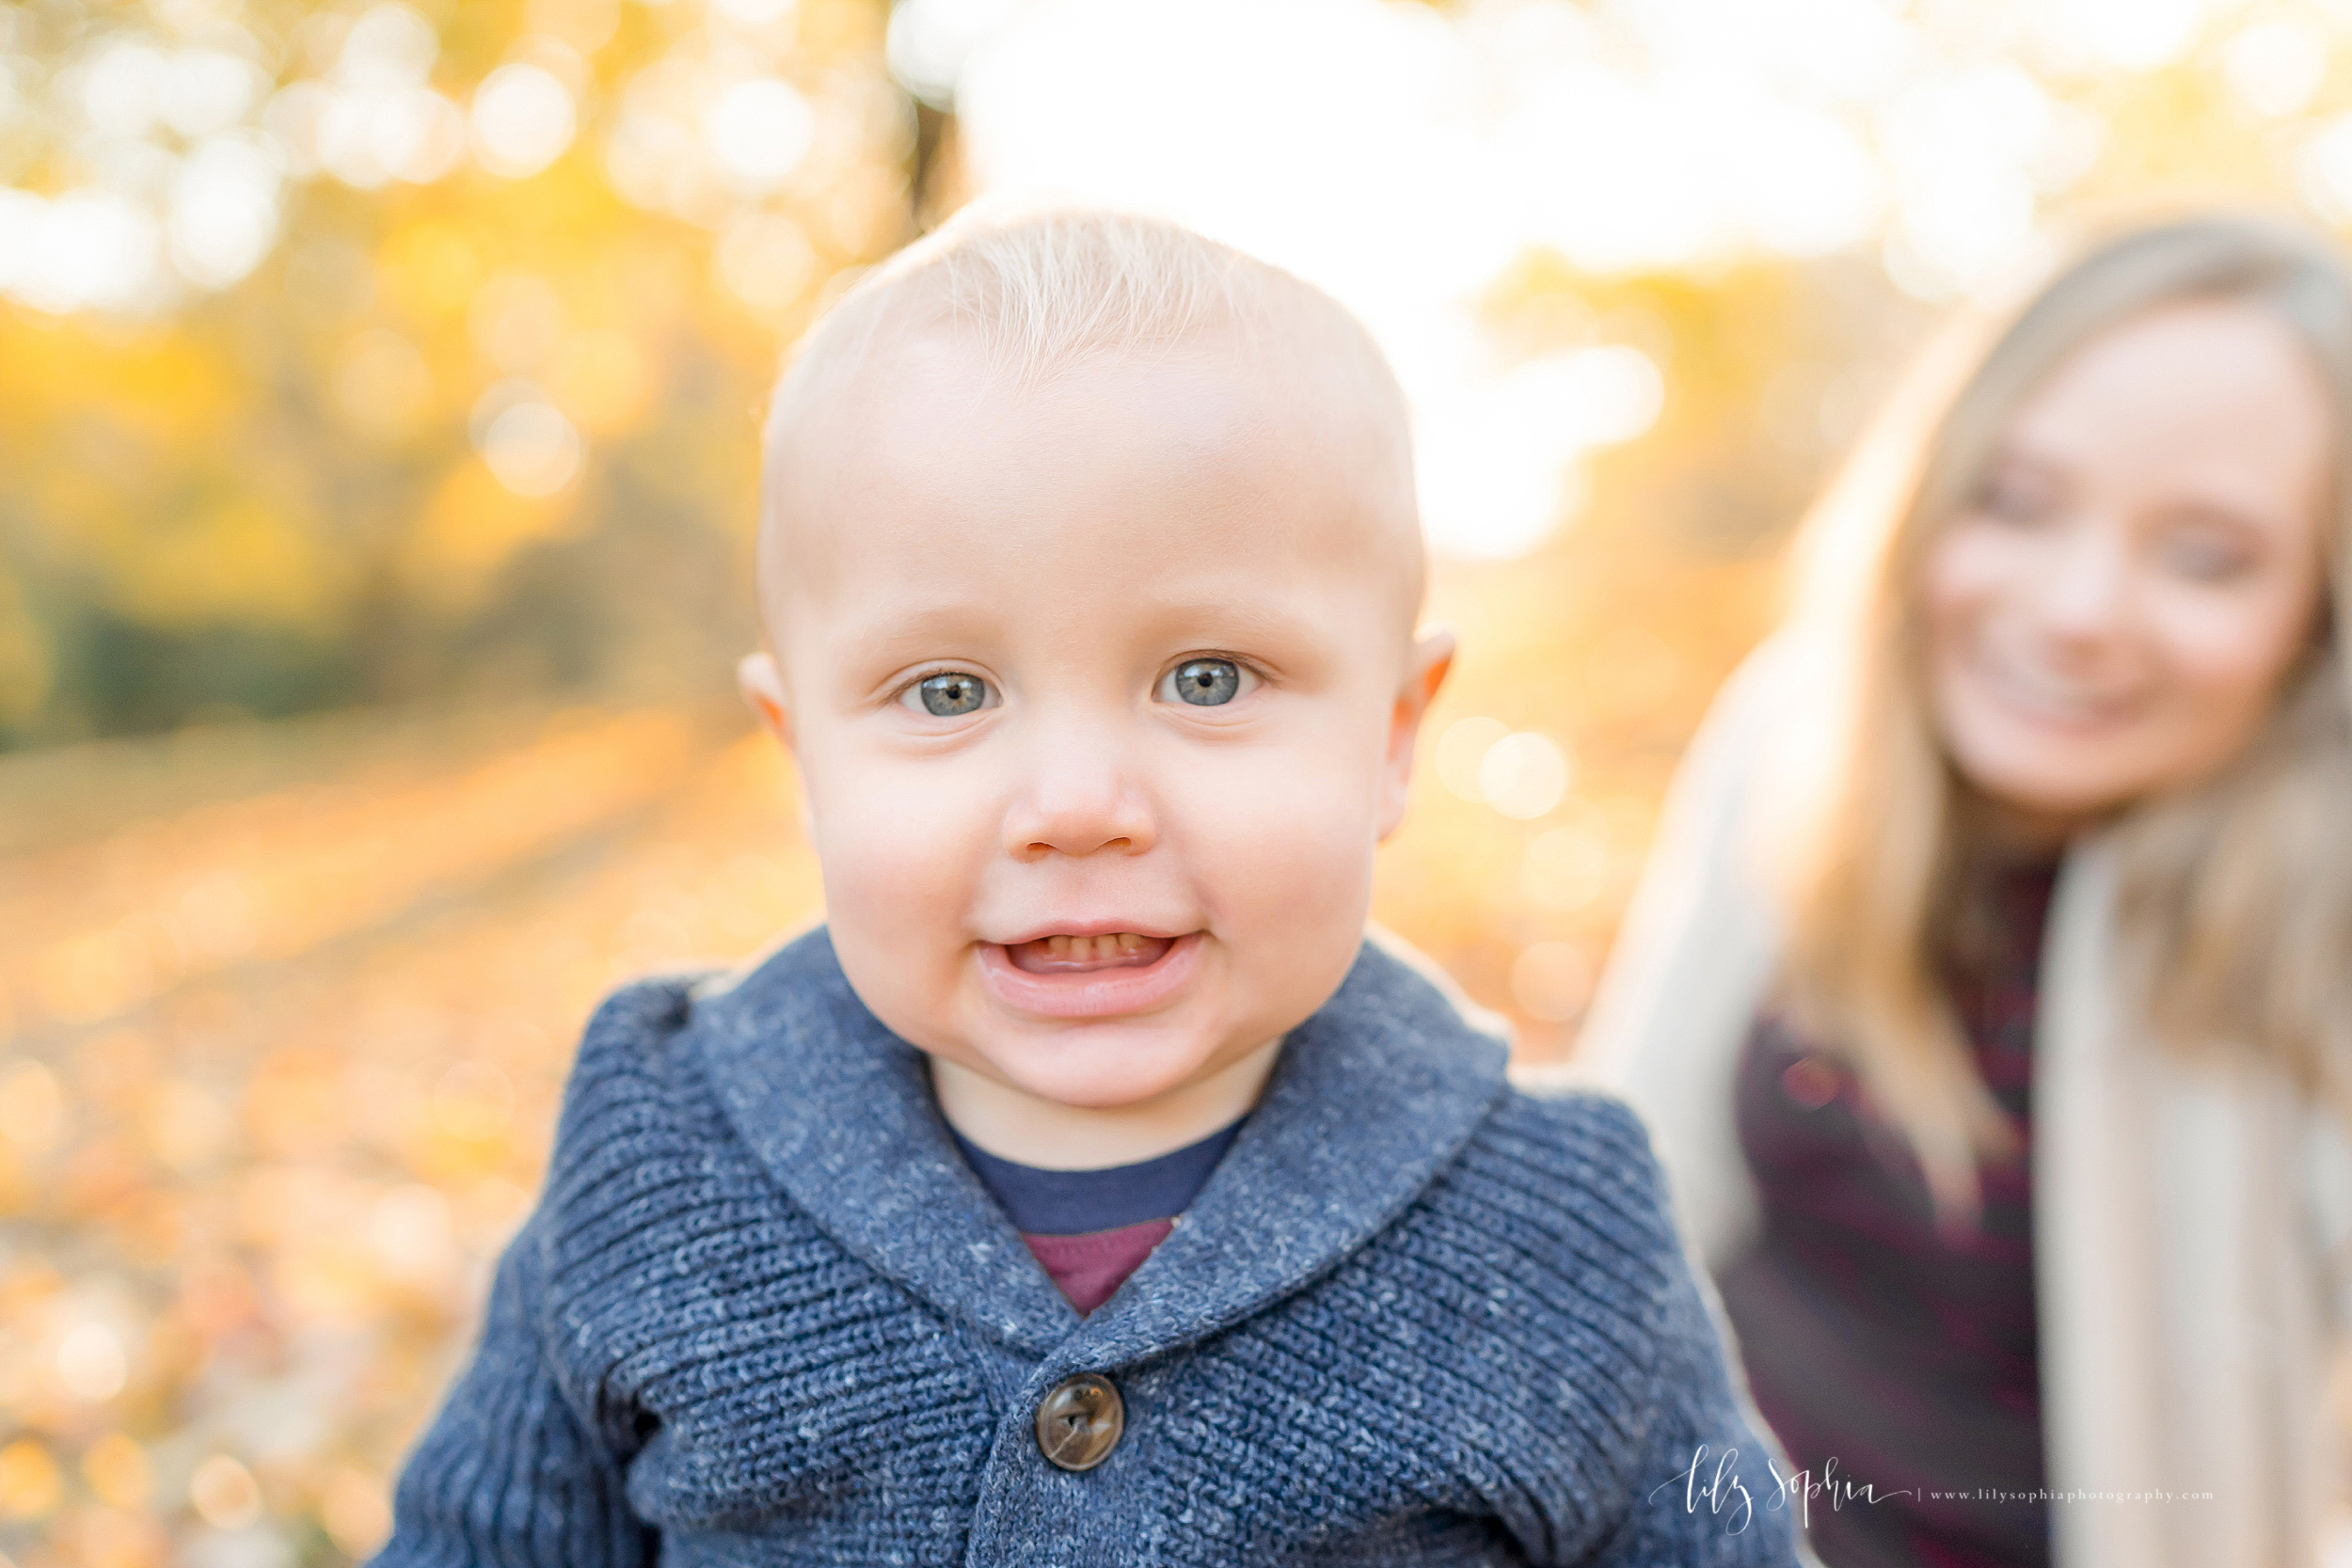 atlanta-midtown-brookhaven-decatur-lily-sophia-photography-photographer-portraits-grant-park-family-sunset-fall-outdoor-session-brothers-toddler-baby_0143.jpg